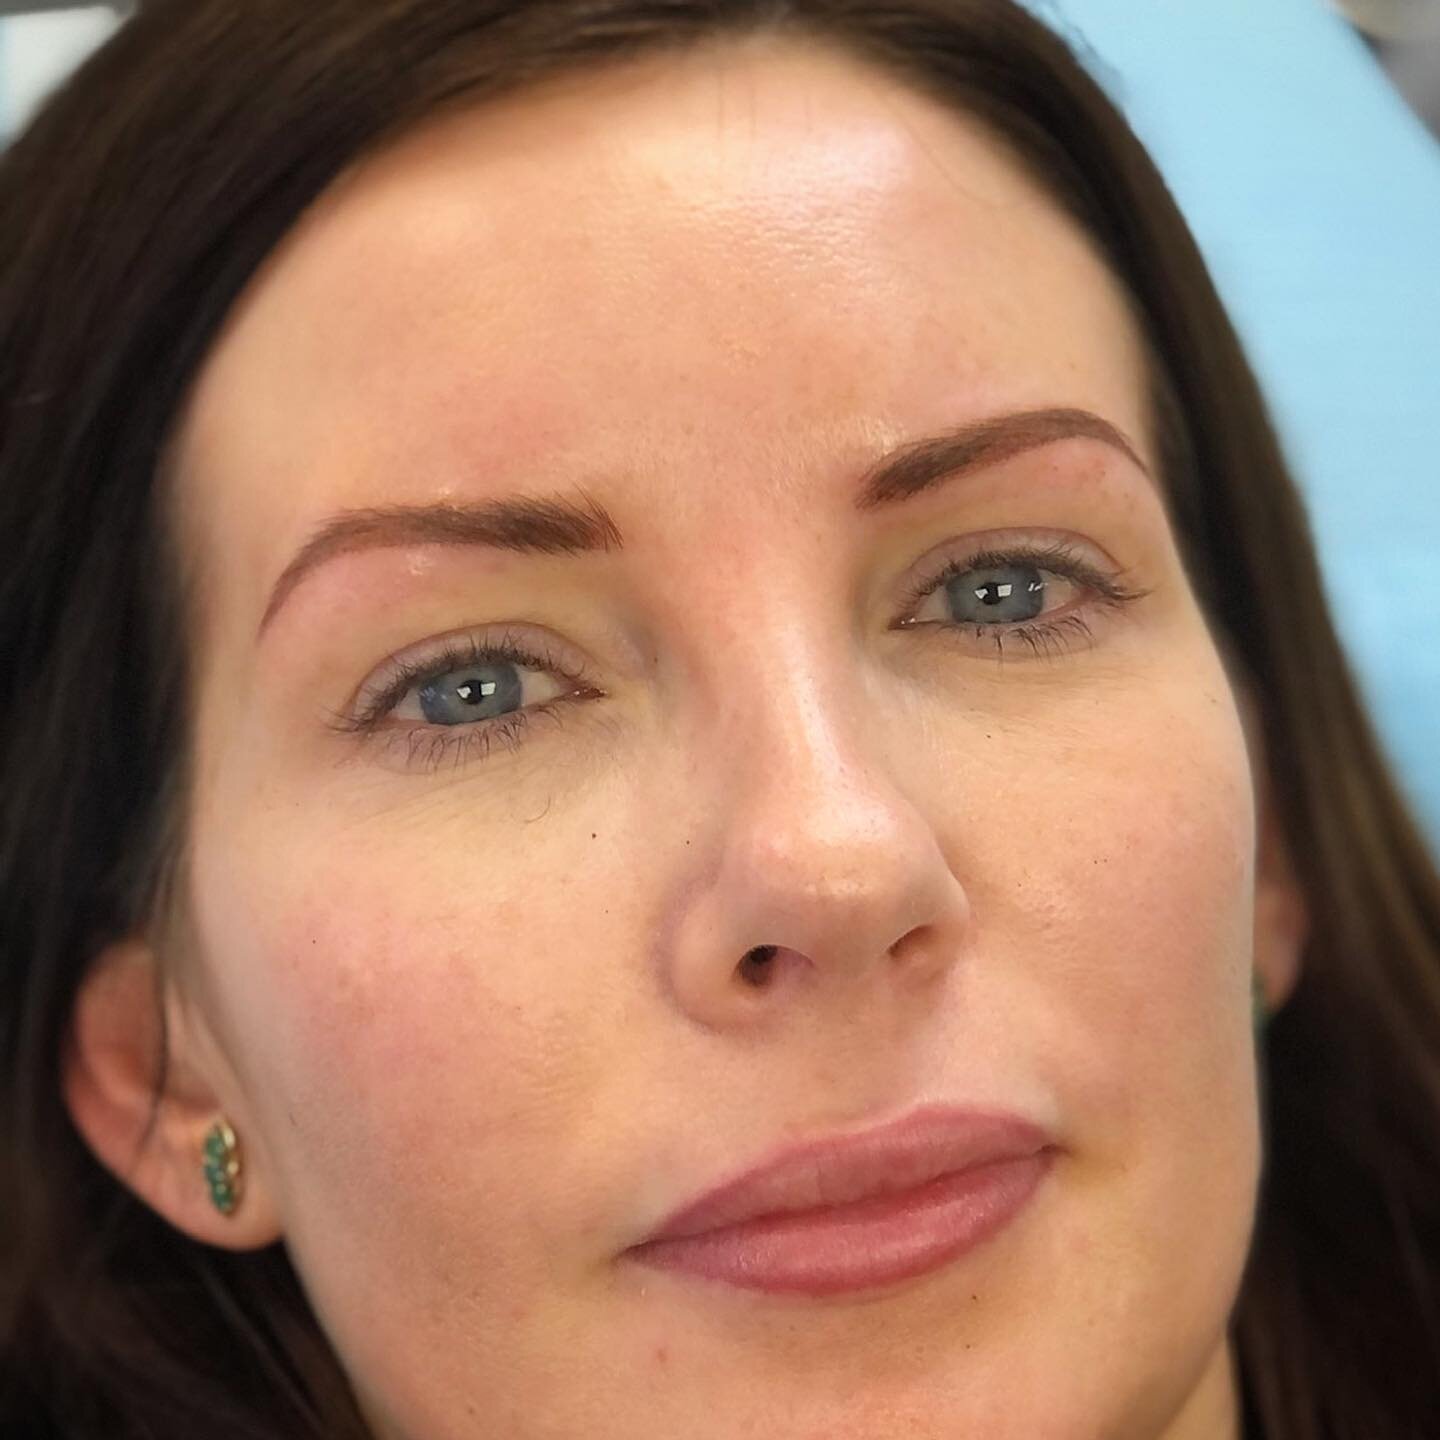 Another beautiful lady with amazing skin 😍 not all brows need to be big and bold brows to suit your face and choice.  #helenrobinsonpmu #pmubrows #powderbrows